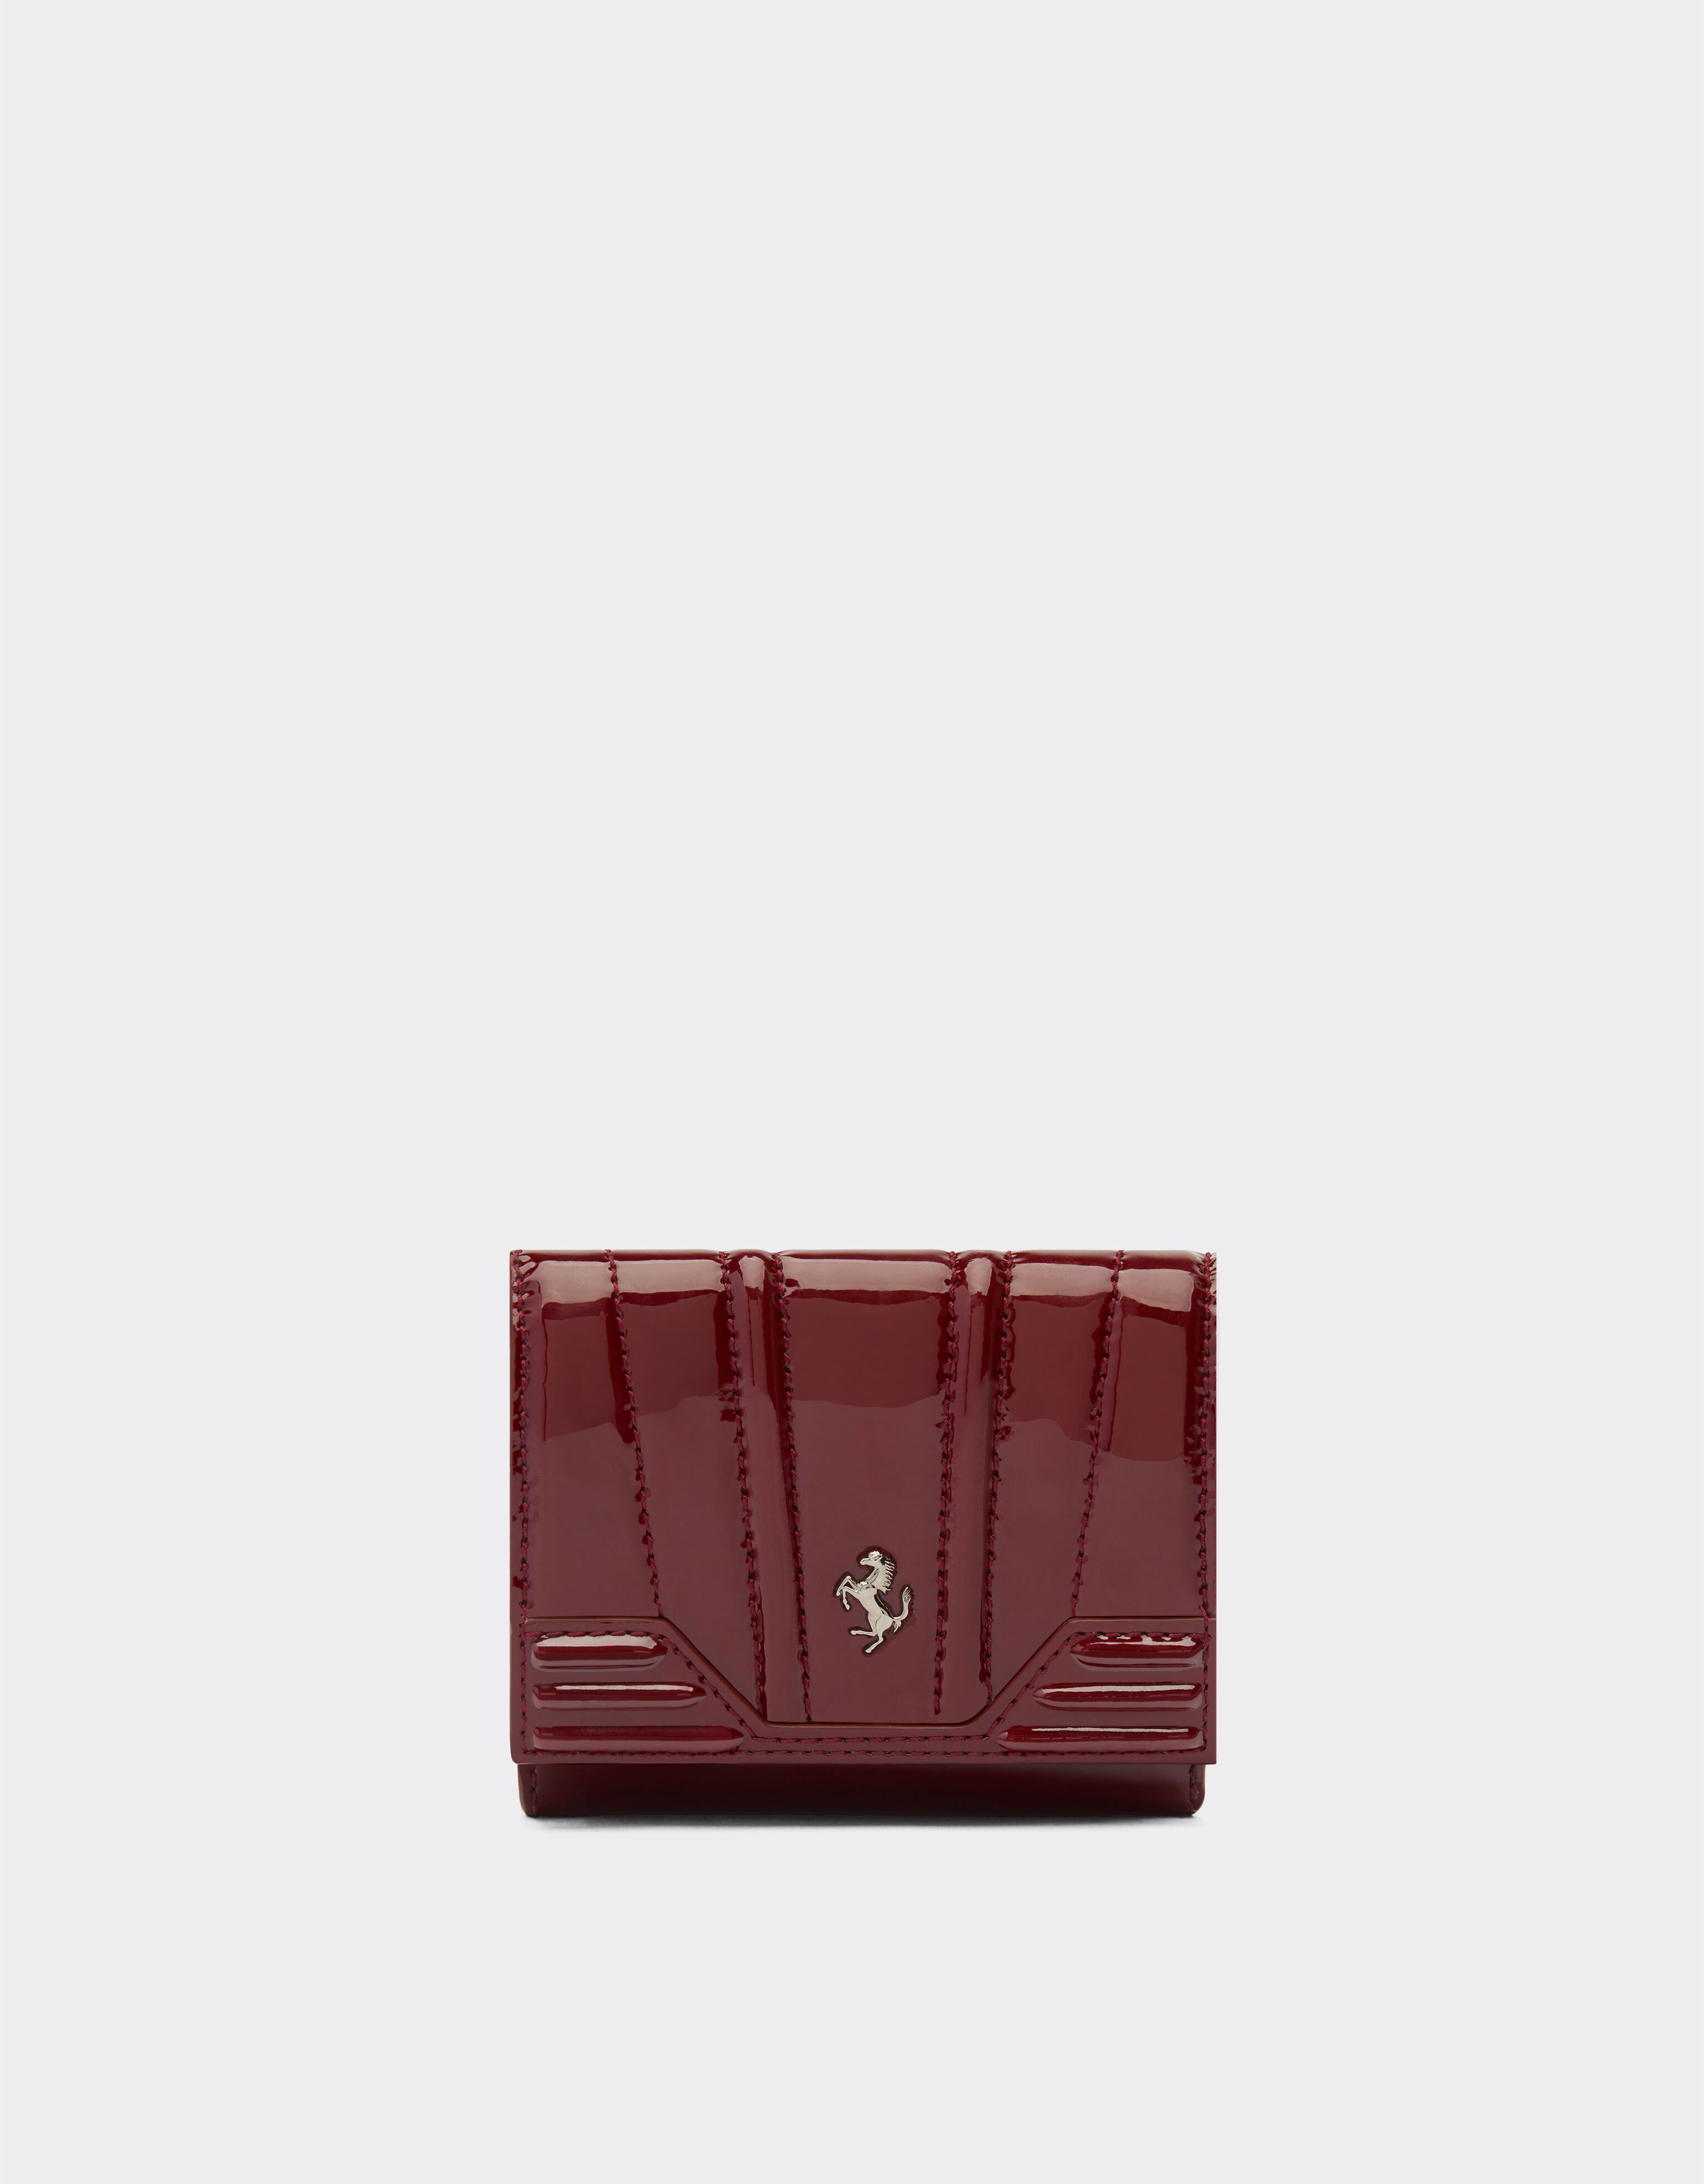 Ferrari Trifold wallet in glossy patent leather Burgundy 20426f